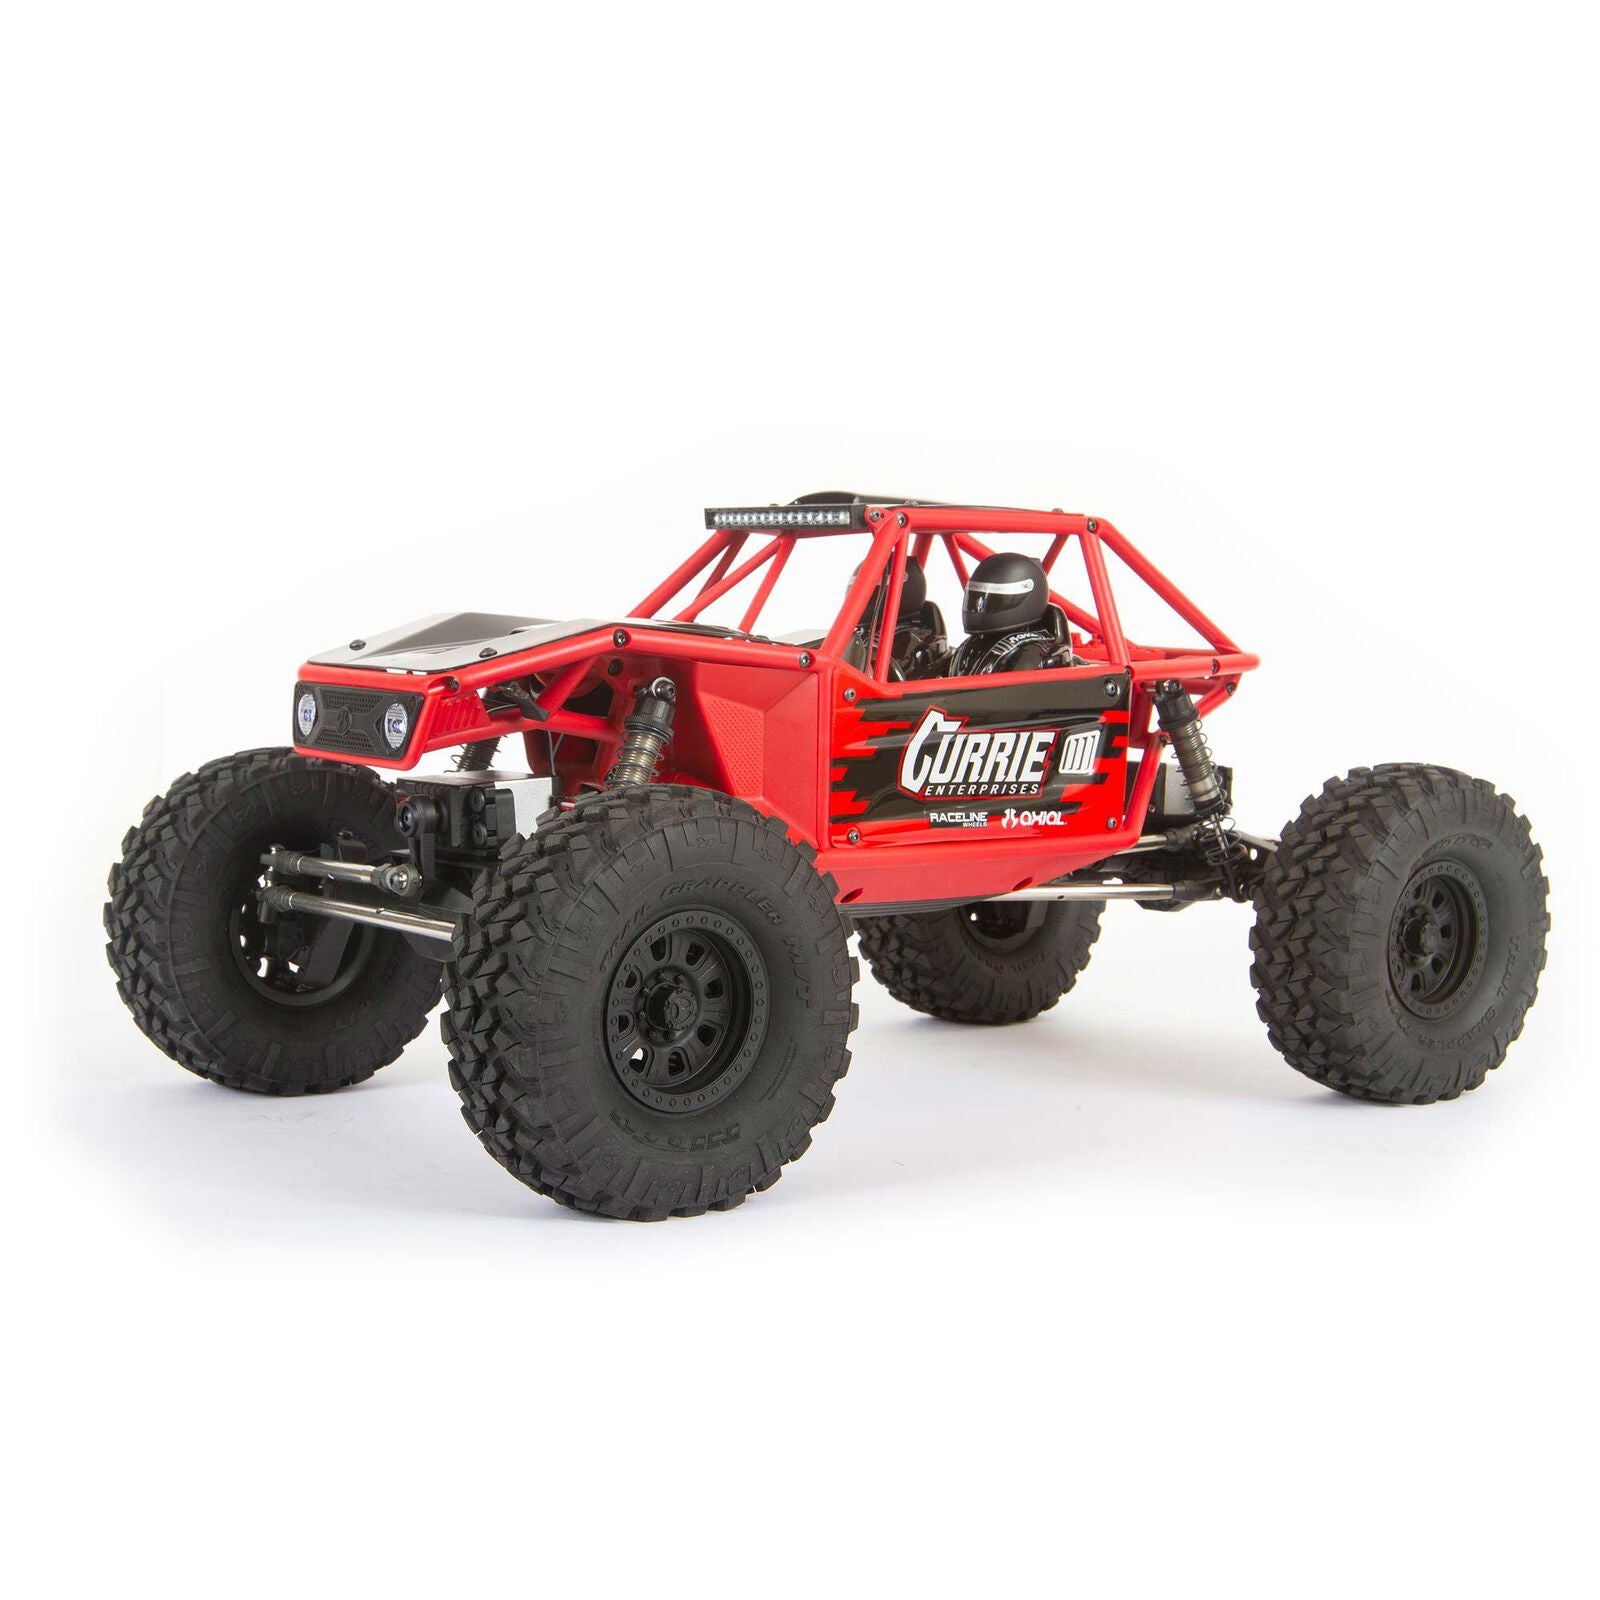 AXIAL AXI03022B 1/10 Capra 1.9 4WS Unlimited Trail Buggy RTR